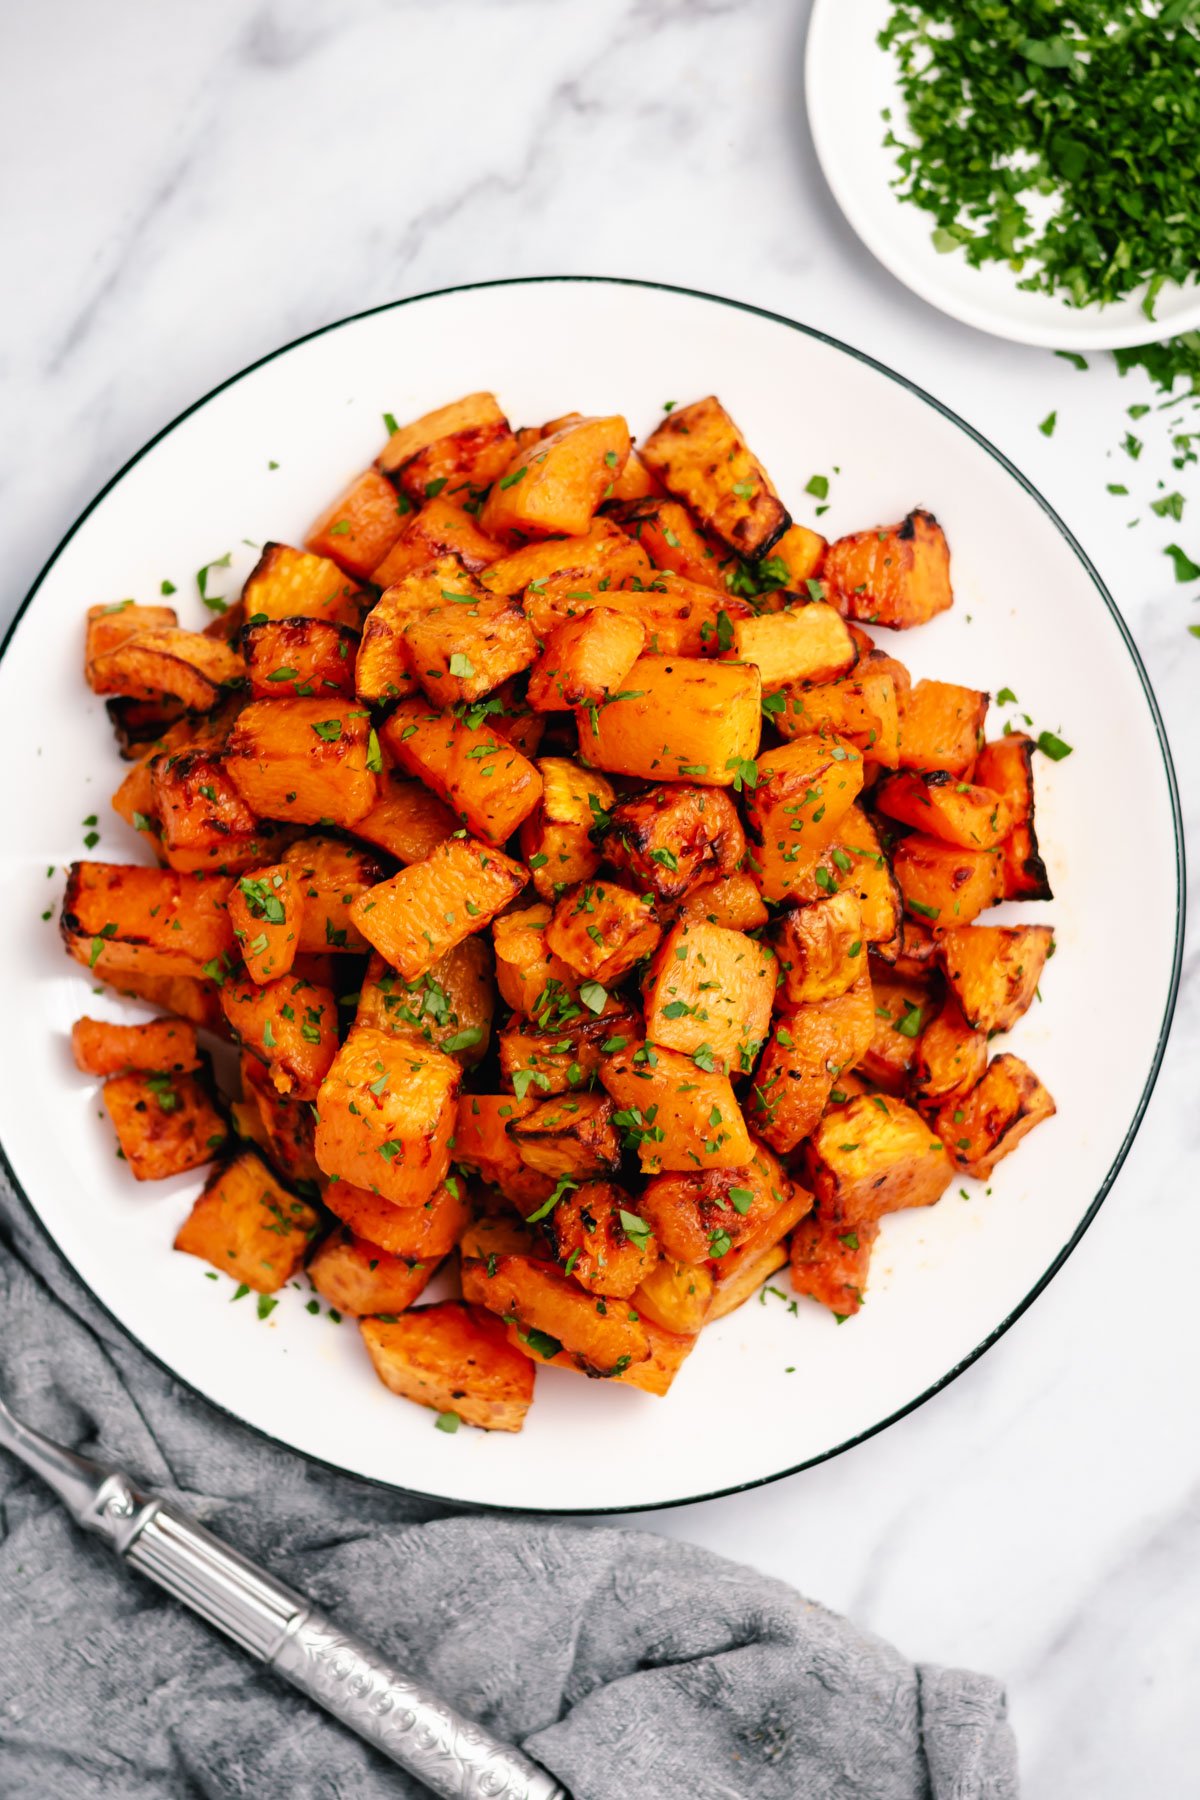 Butternut squash is a simple side that can go with almost anything. This air fryer recipe is paleo, Whole30, and gluten free. Using only a few staple ingredients it is ready in twenty minutes from start to finish. Add a new fresh and healthy side to your rotation with this air fryer butternut squash recipe! #healthyairfryerrecipes #butternutsquashrecipes #butternutsquash #glutenfreerecipes #dairyfreerecipes #glutenfreedairyfreerecipes